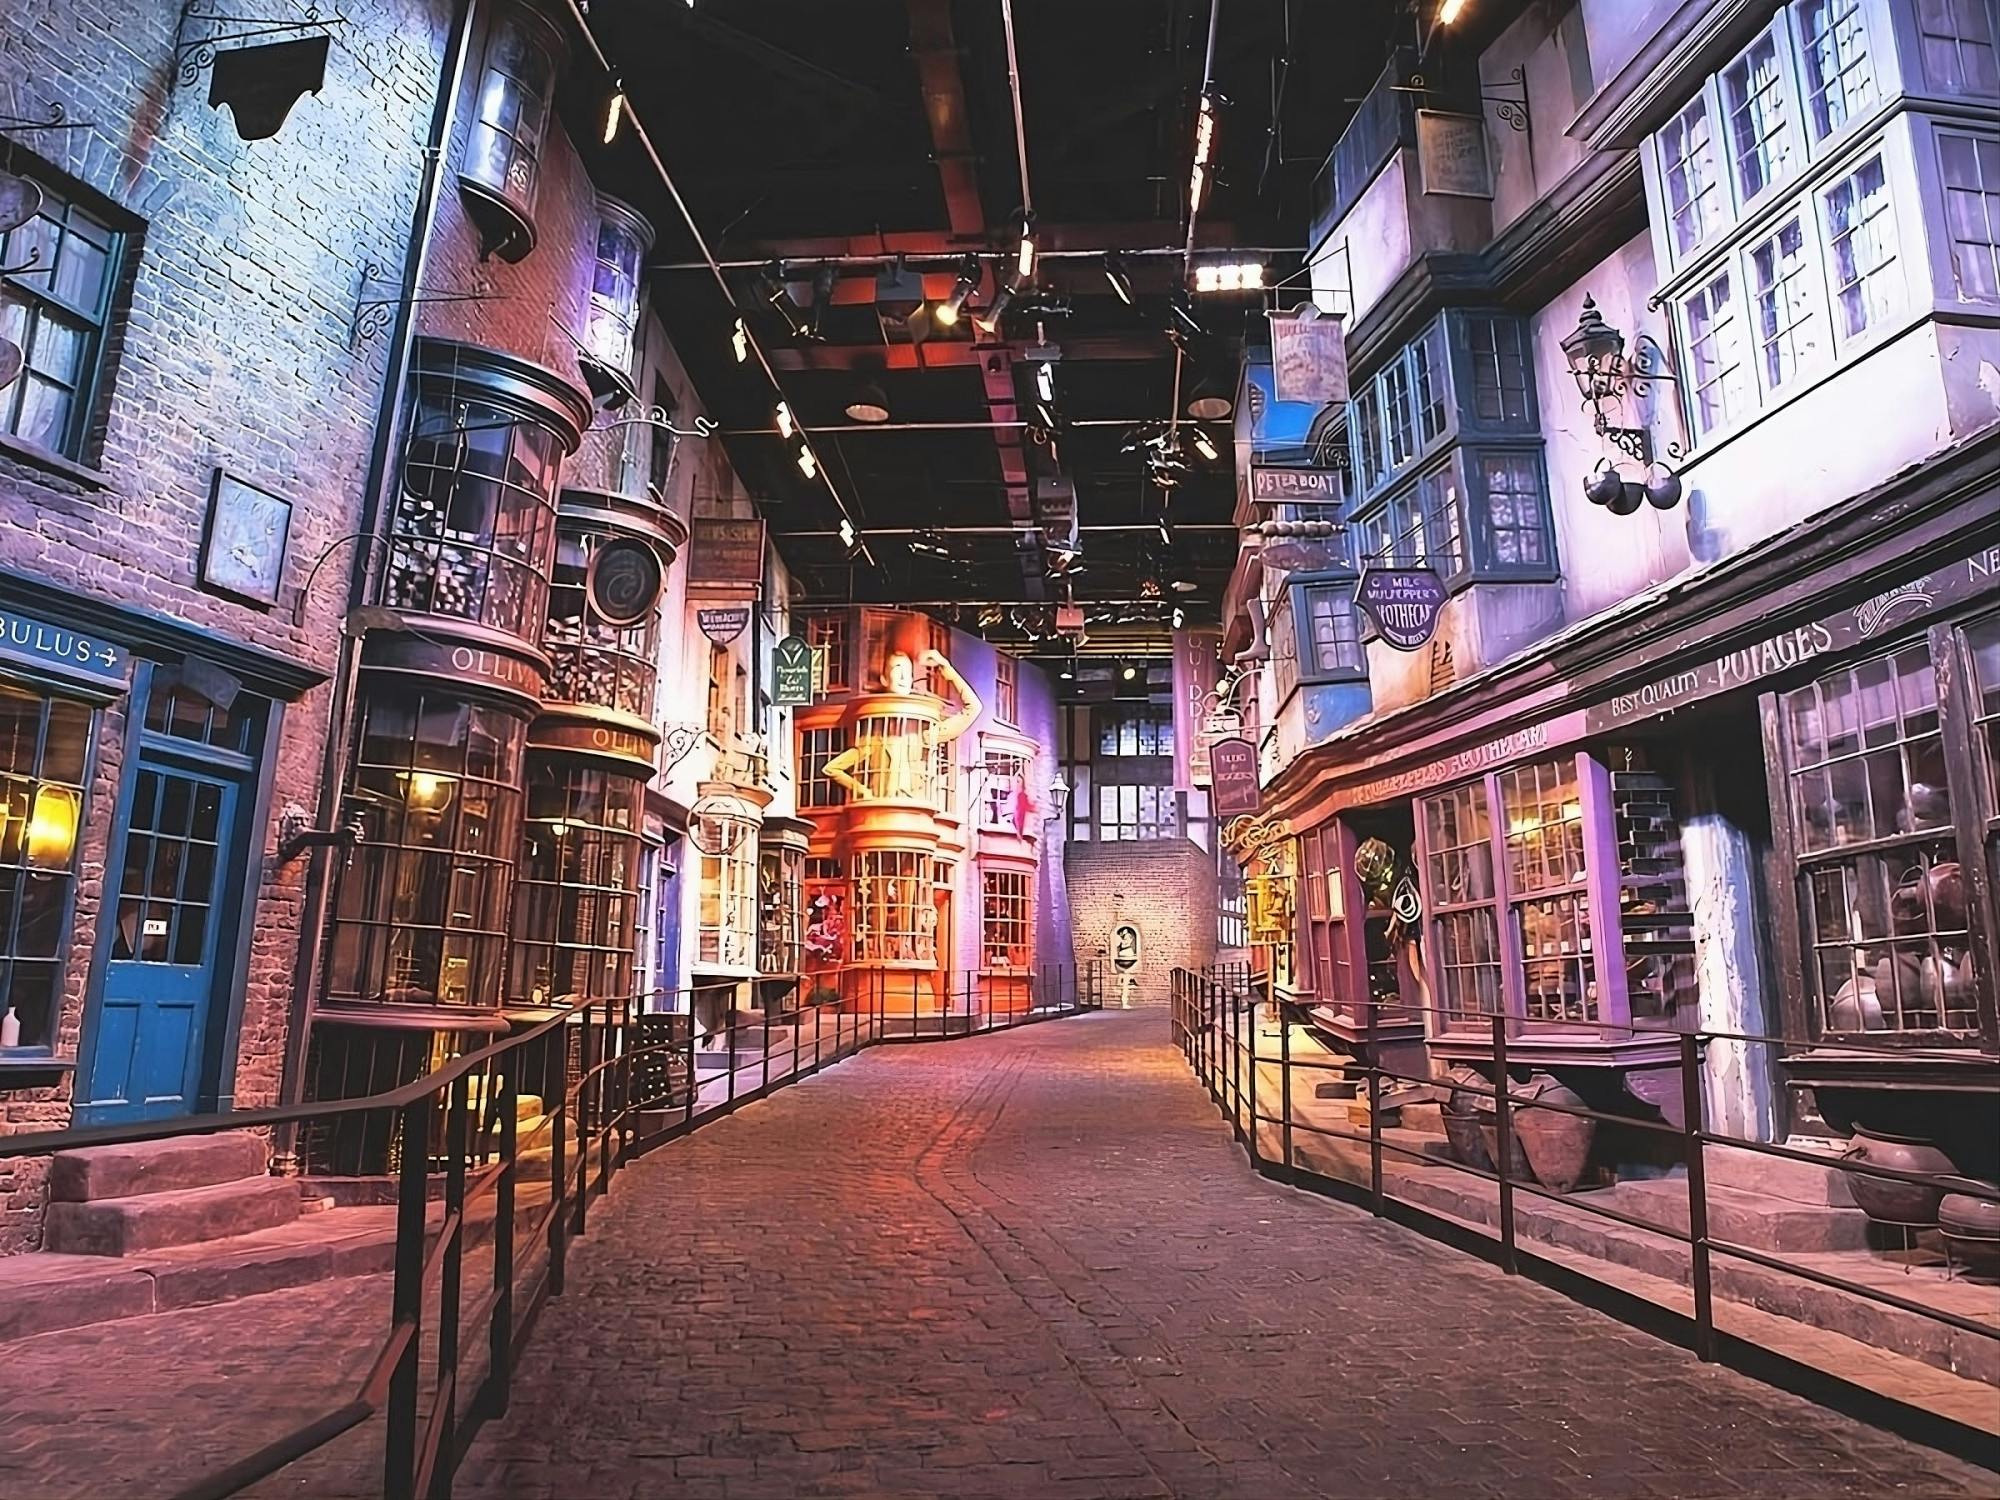 From London: Warner Bros. Studio tour London - The Making of Harry Potter entry ticket and escorted train transfer